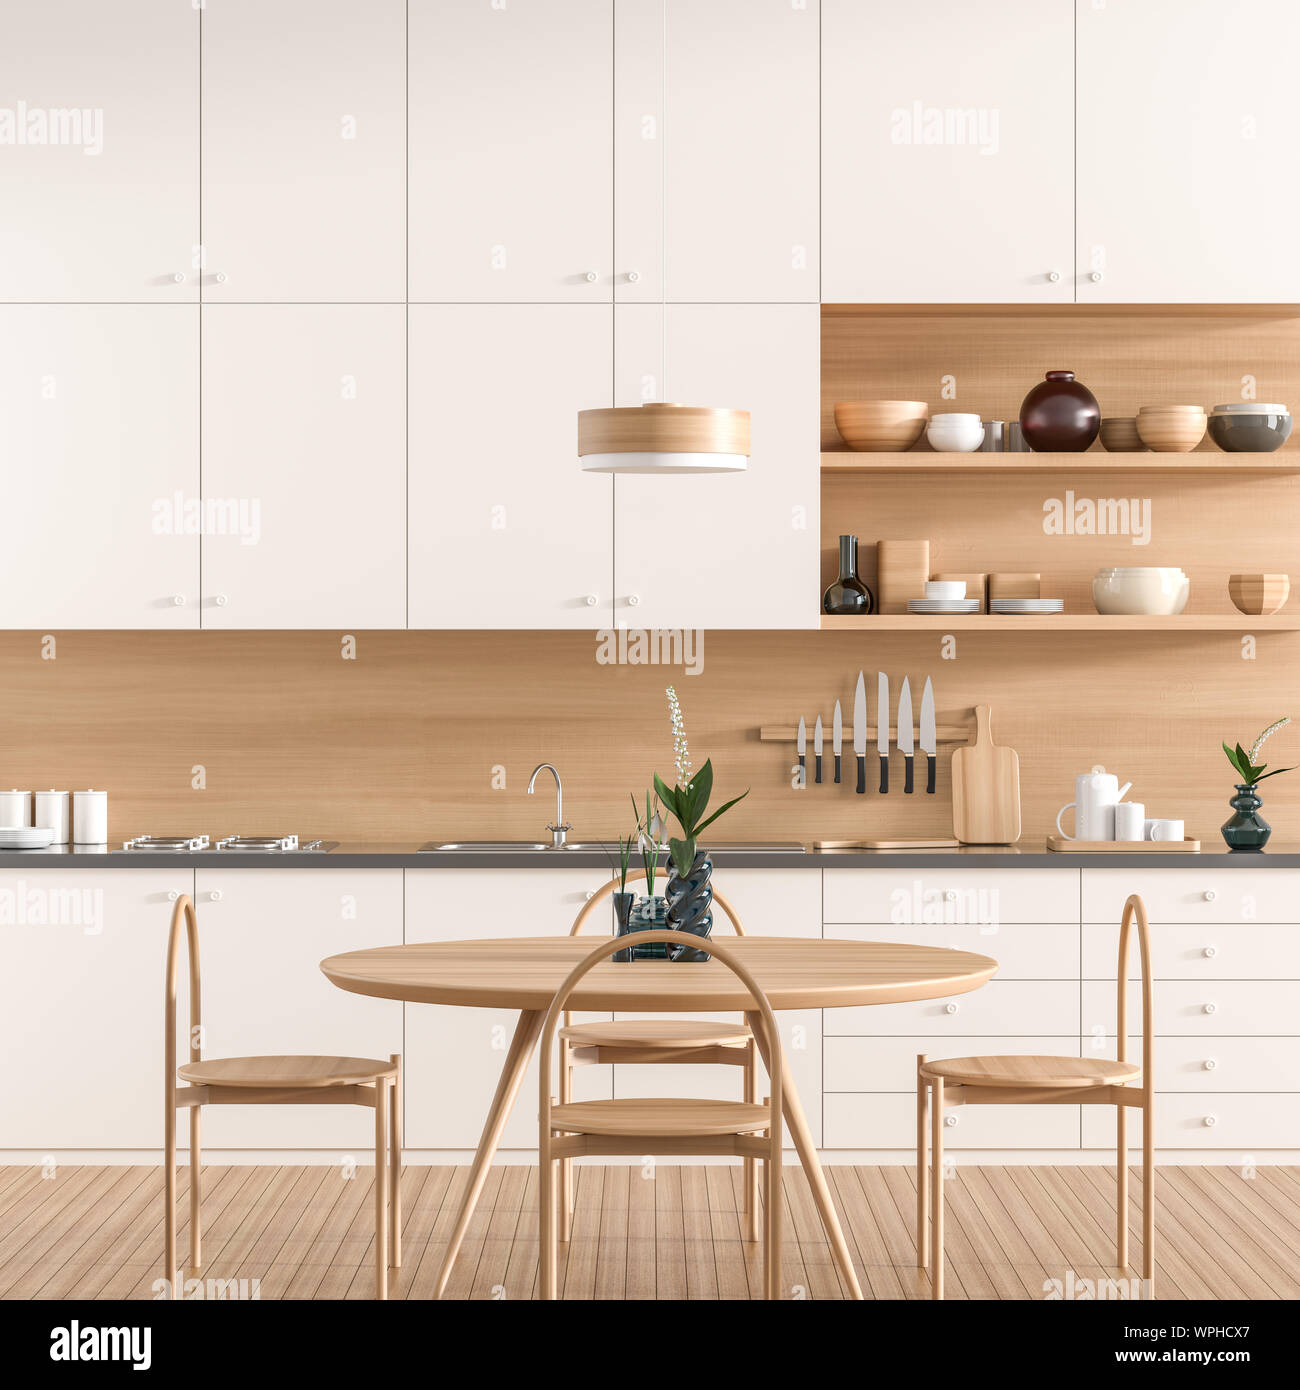 Scandinavian Style Modern Kitchen With Dining Table Modern Kitchen Design With Wooden Furnitures 3d Illustration Stock Photo Alamy,Small Cottage Designs India